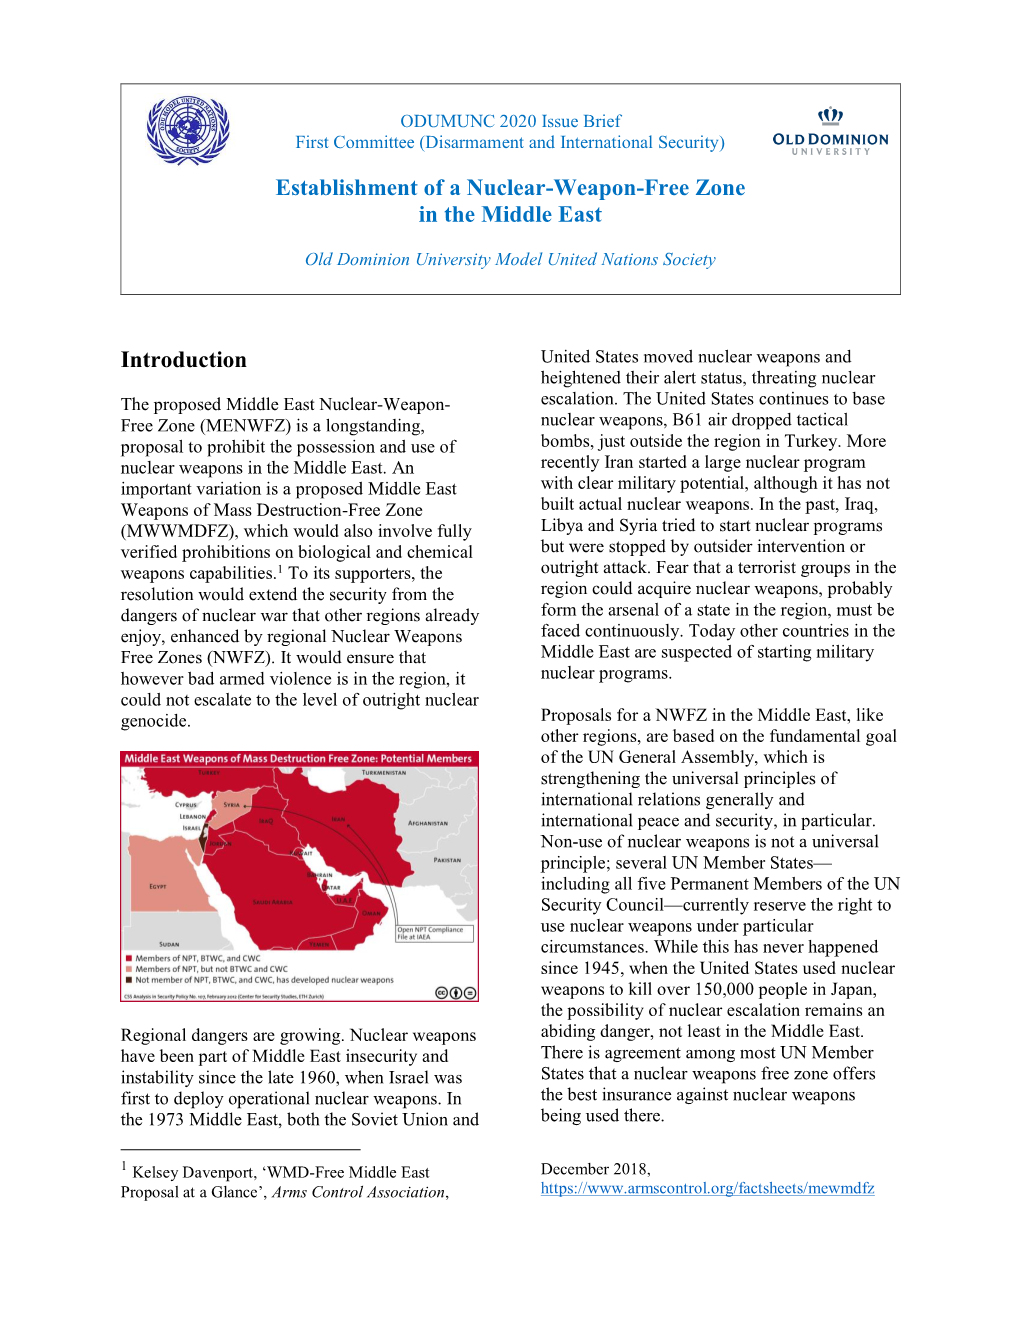 Establishment of a Nuclear-Weapon-Free Zone in the Middle East